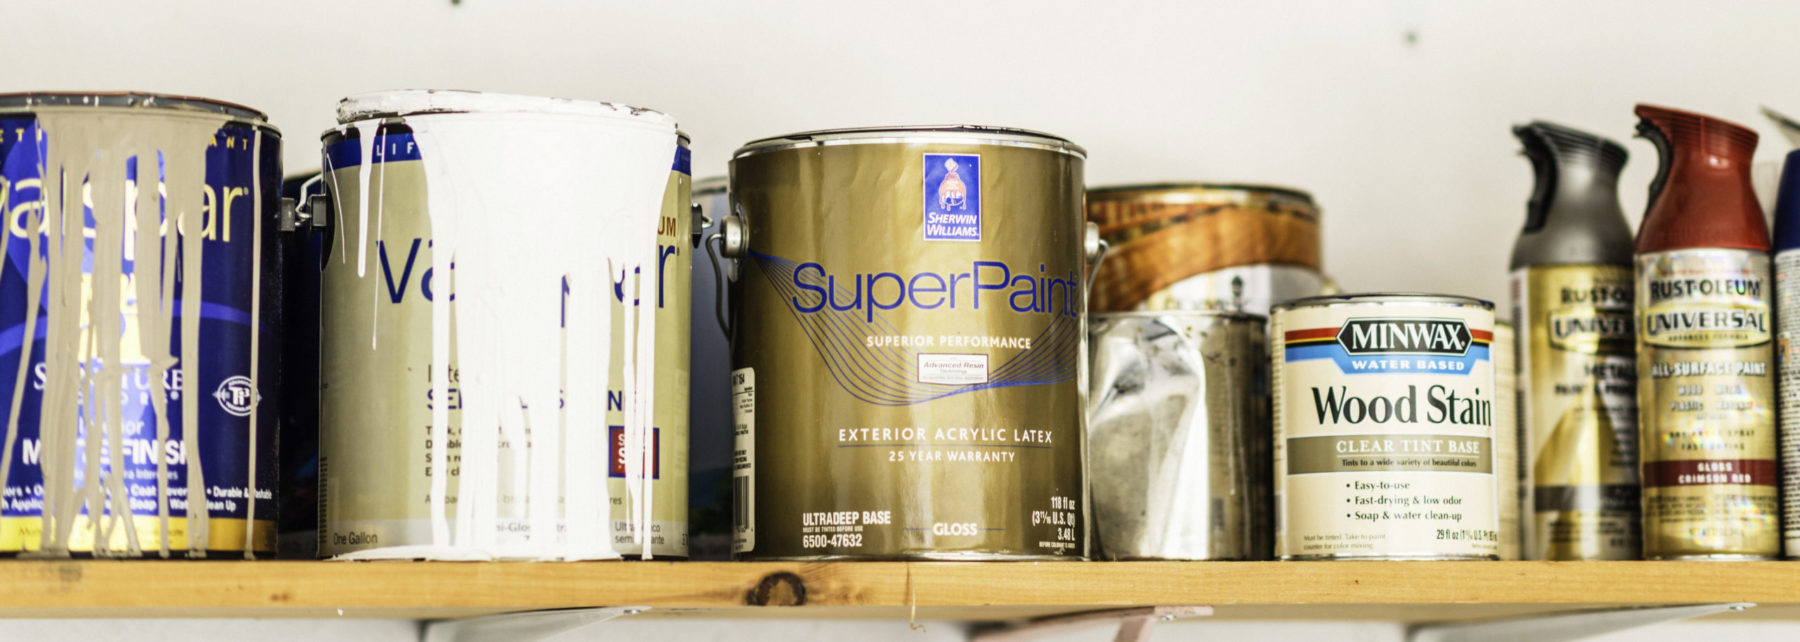 A horizontal shot of a collection of opened and unopened American brand cans of paint, wood stain and paint sprays organized neatly on a wooden shelf.